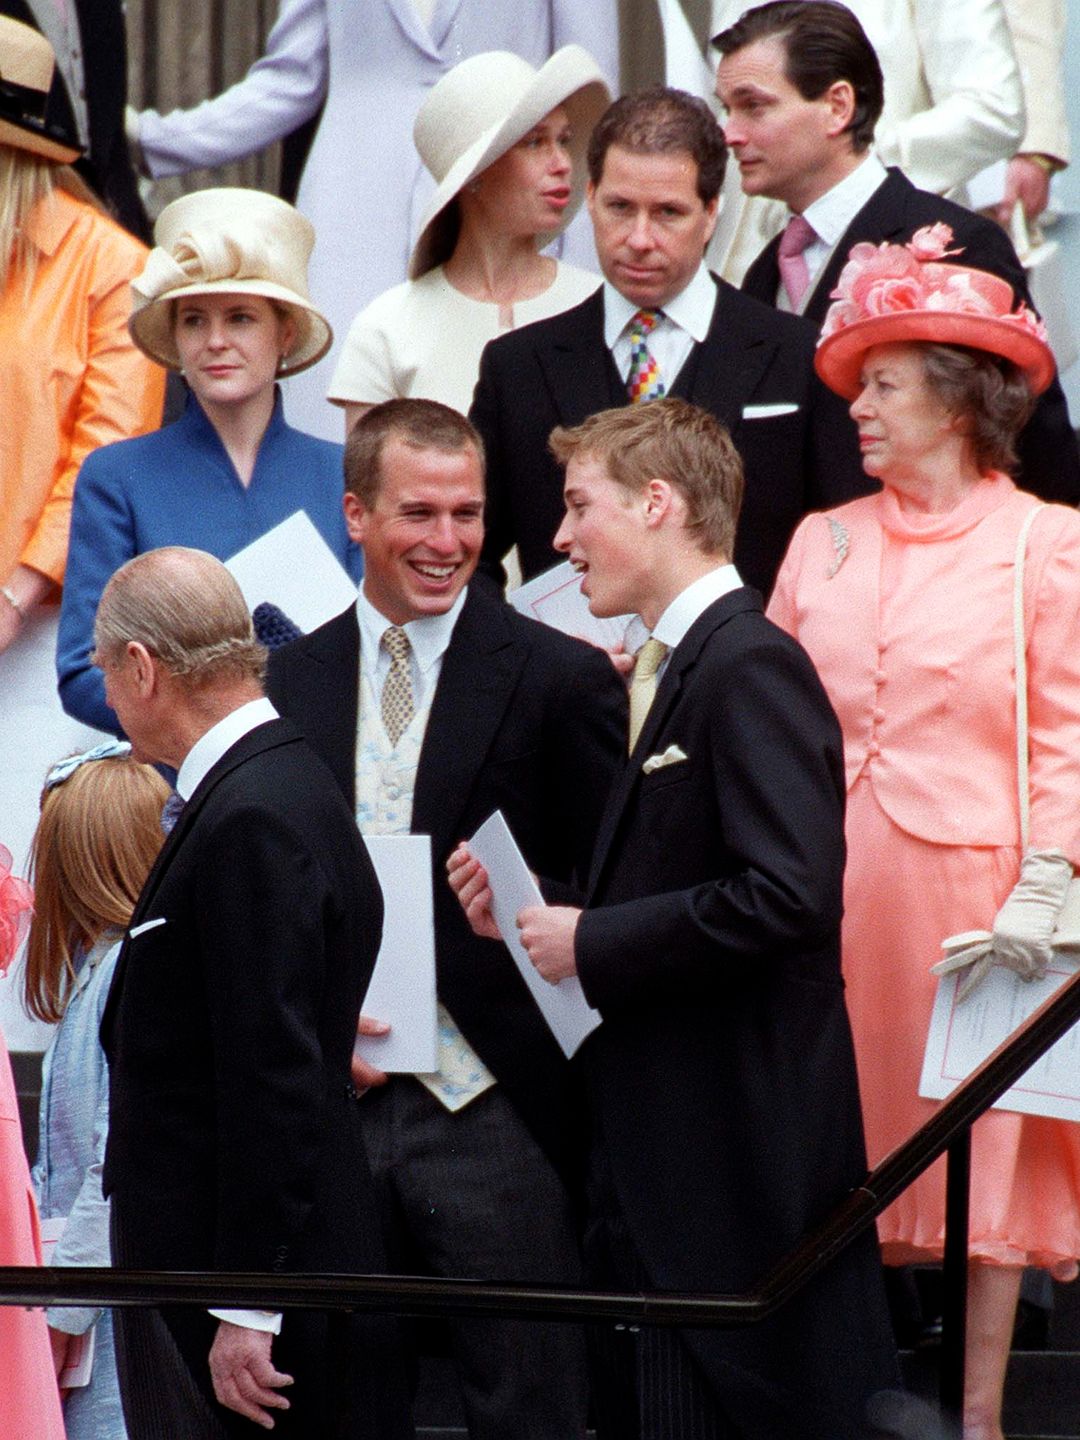 royals laughing at formal event 